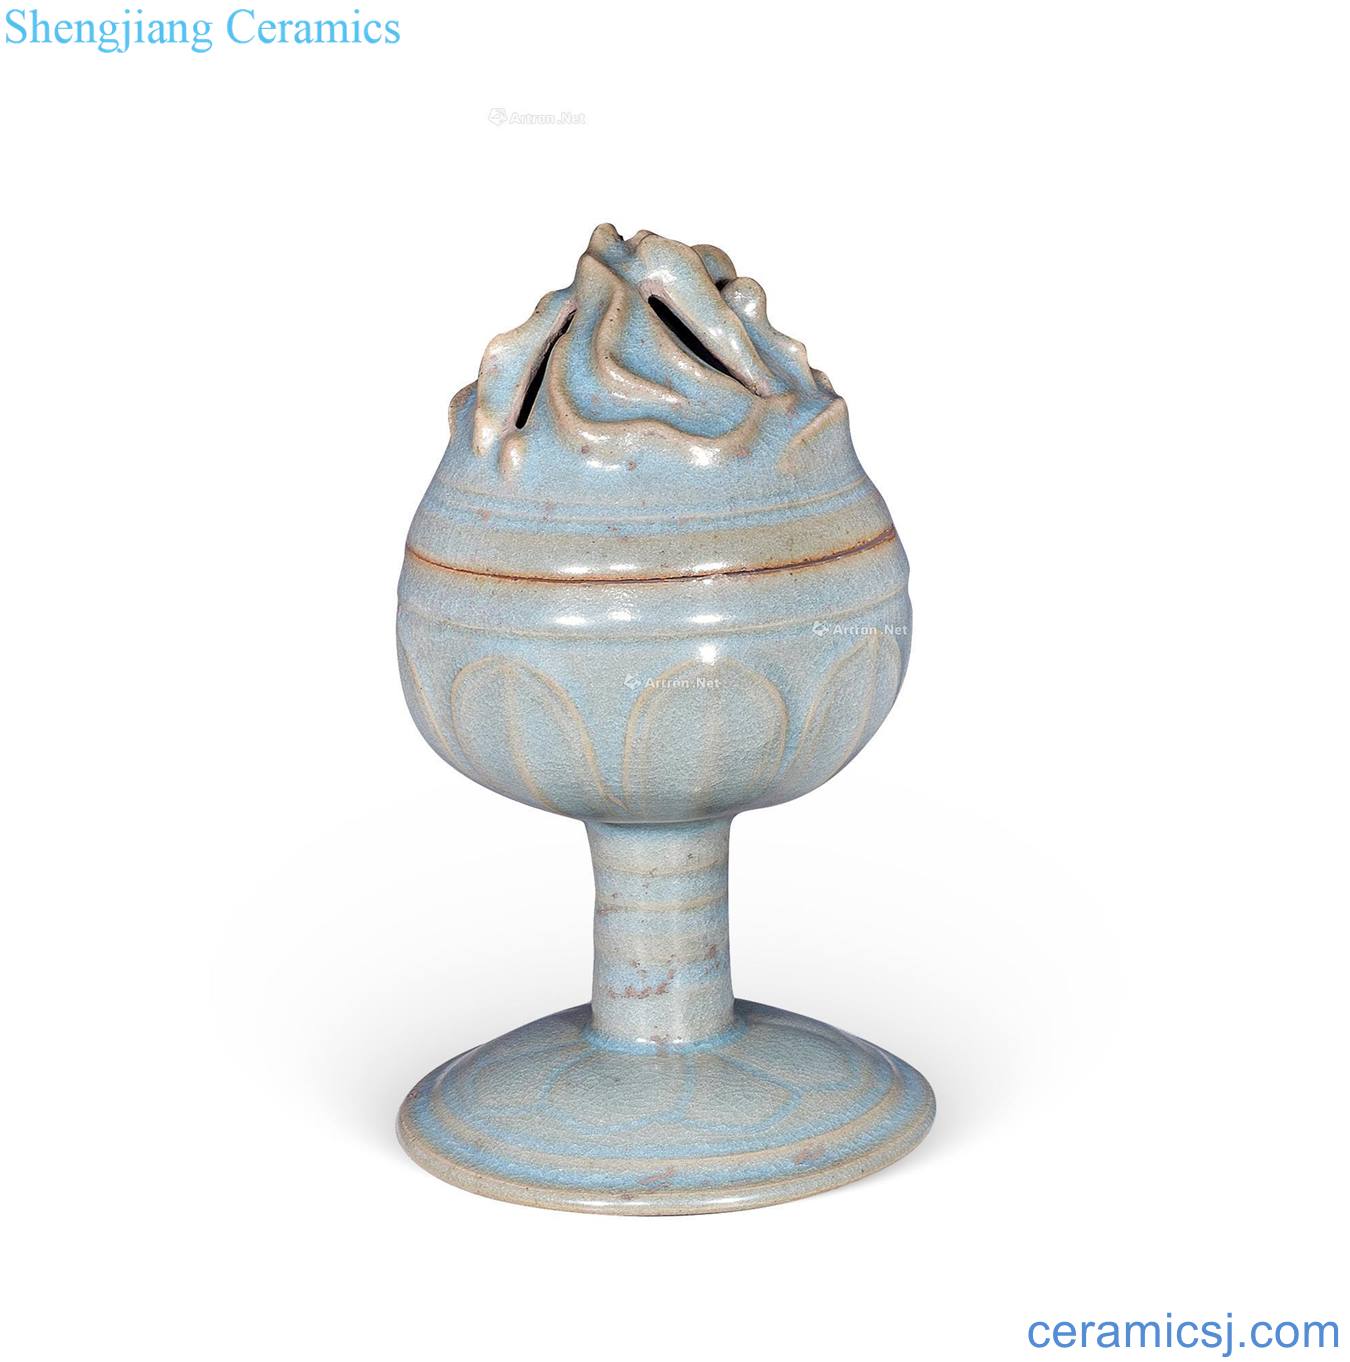 Northern song dynasty The azure glaze your kiln of fragrance